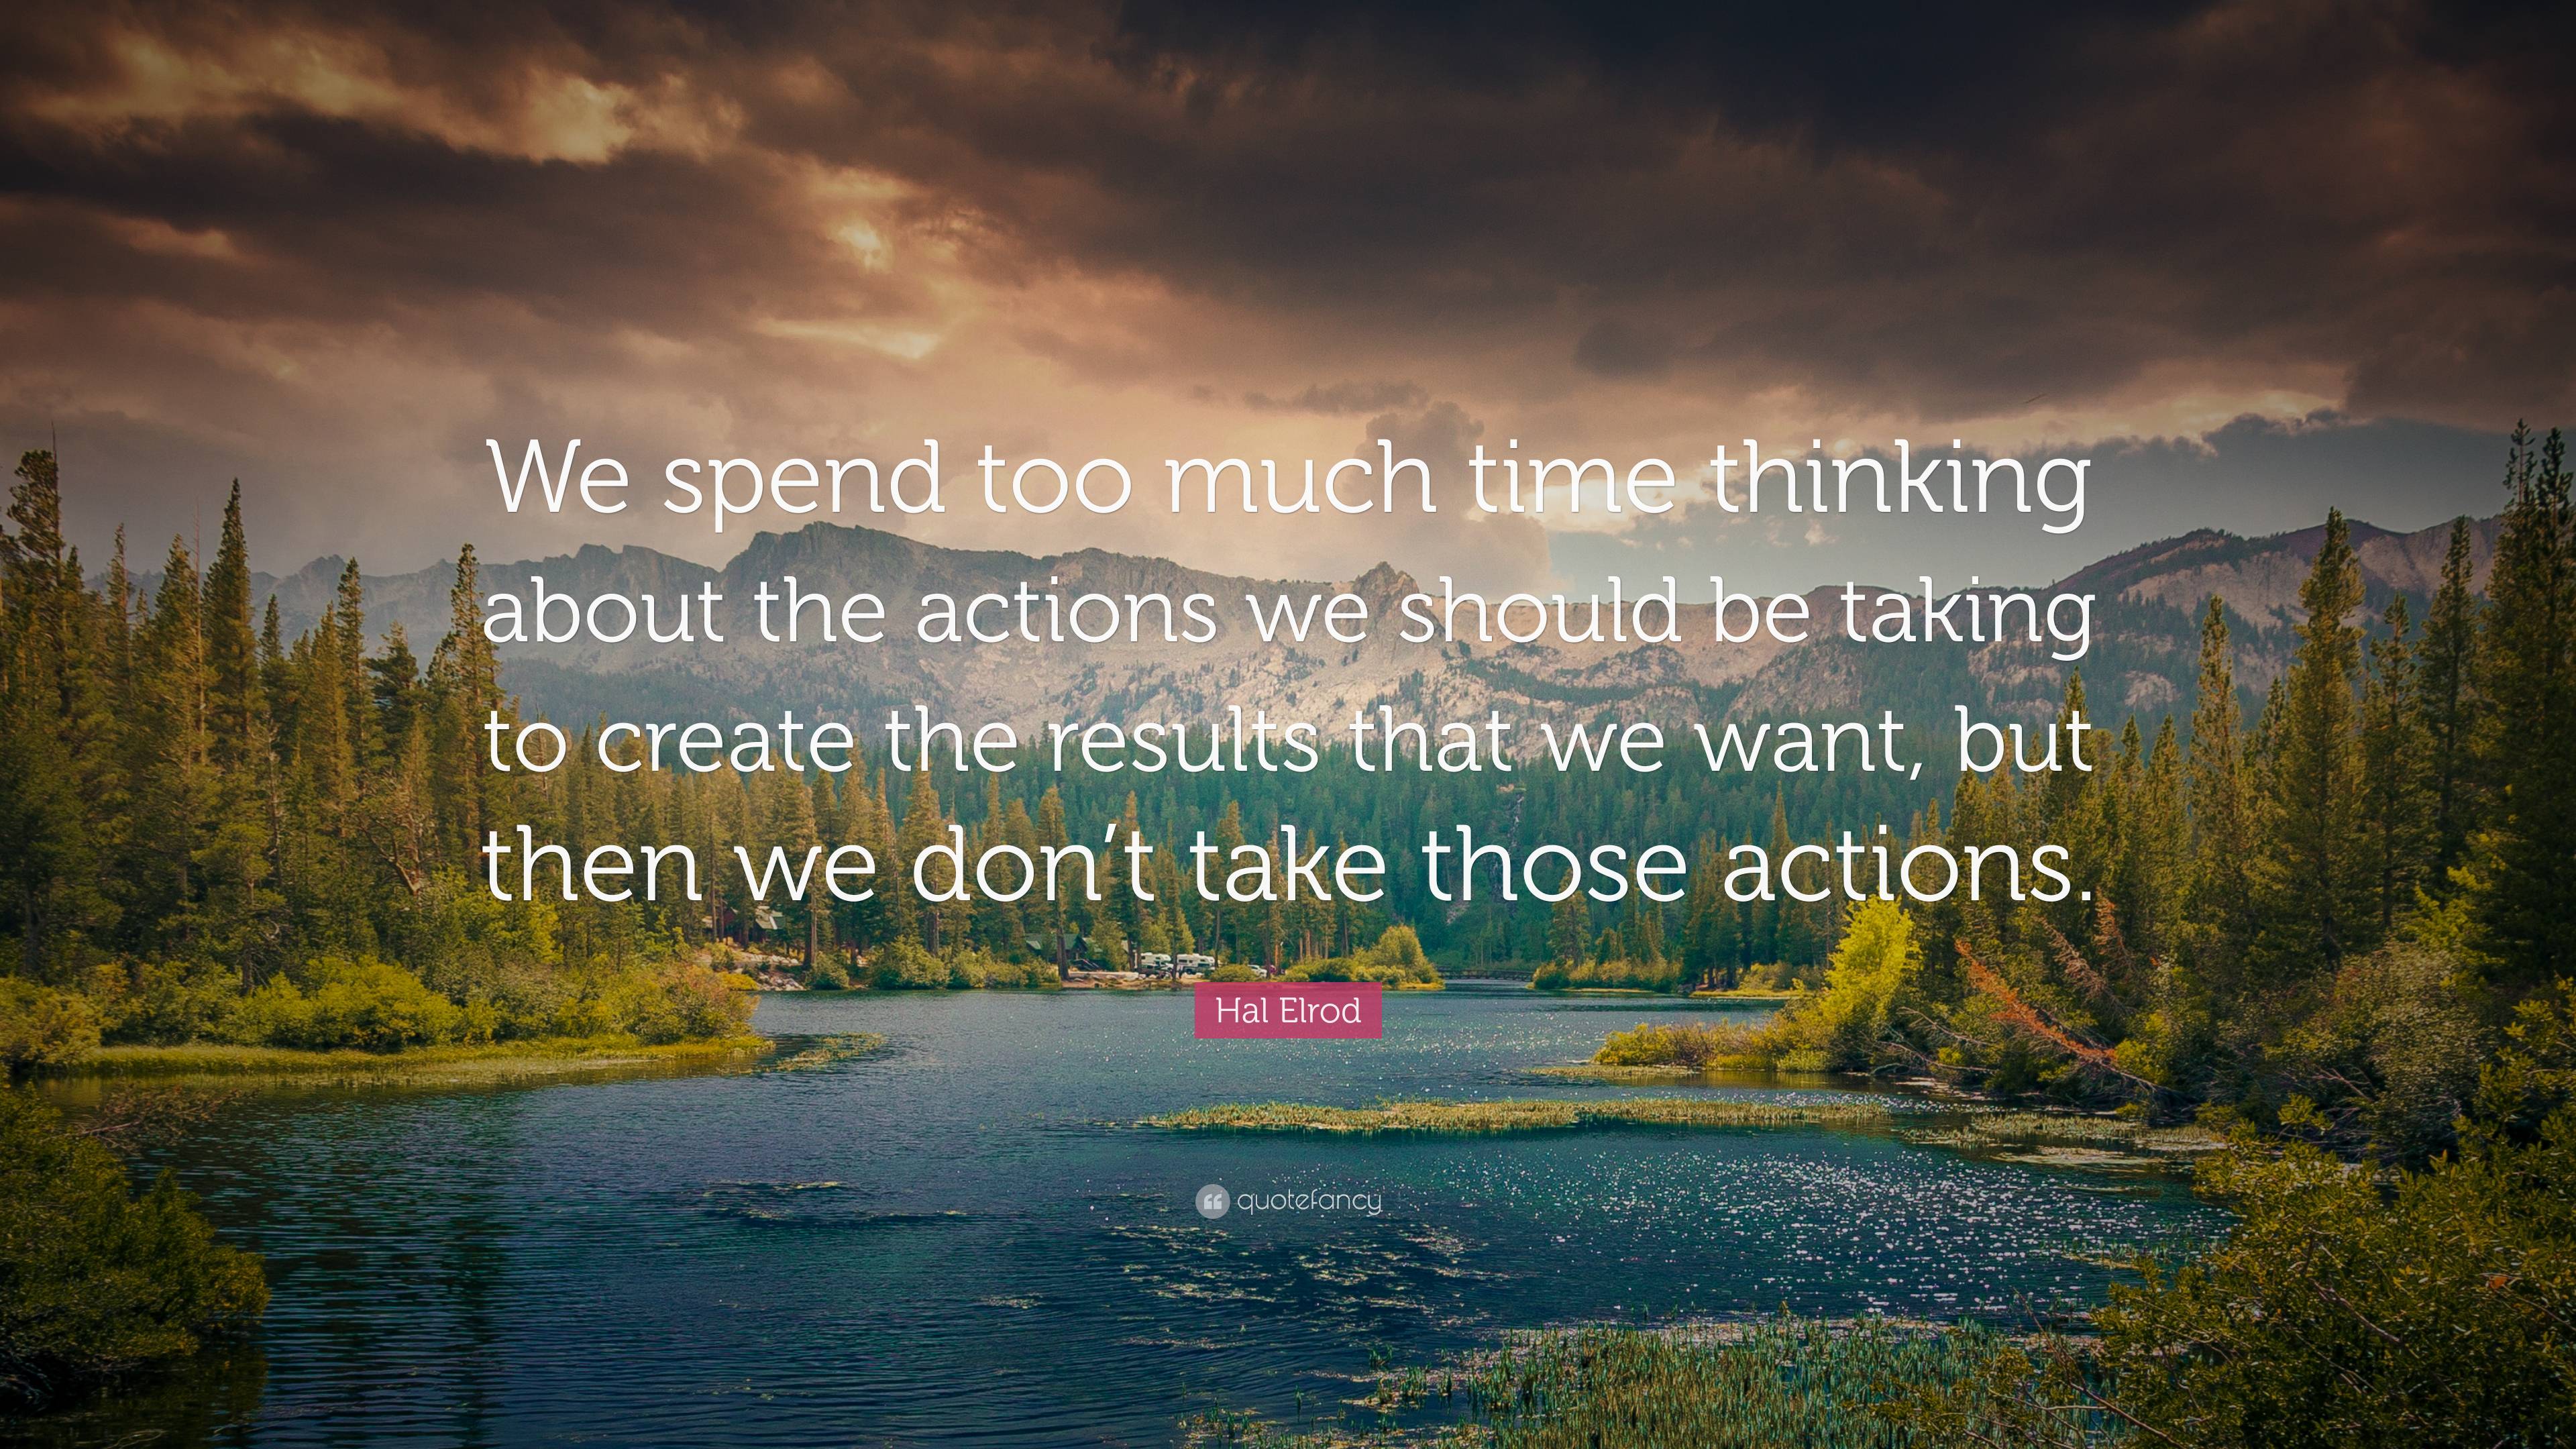 Hal Elrod Quote: “We spend too much time thinking about the actions we ...